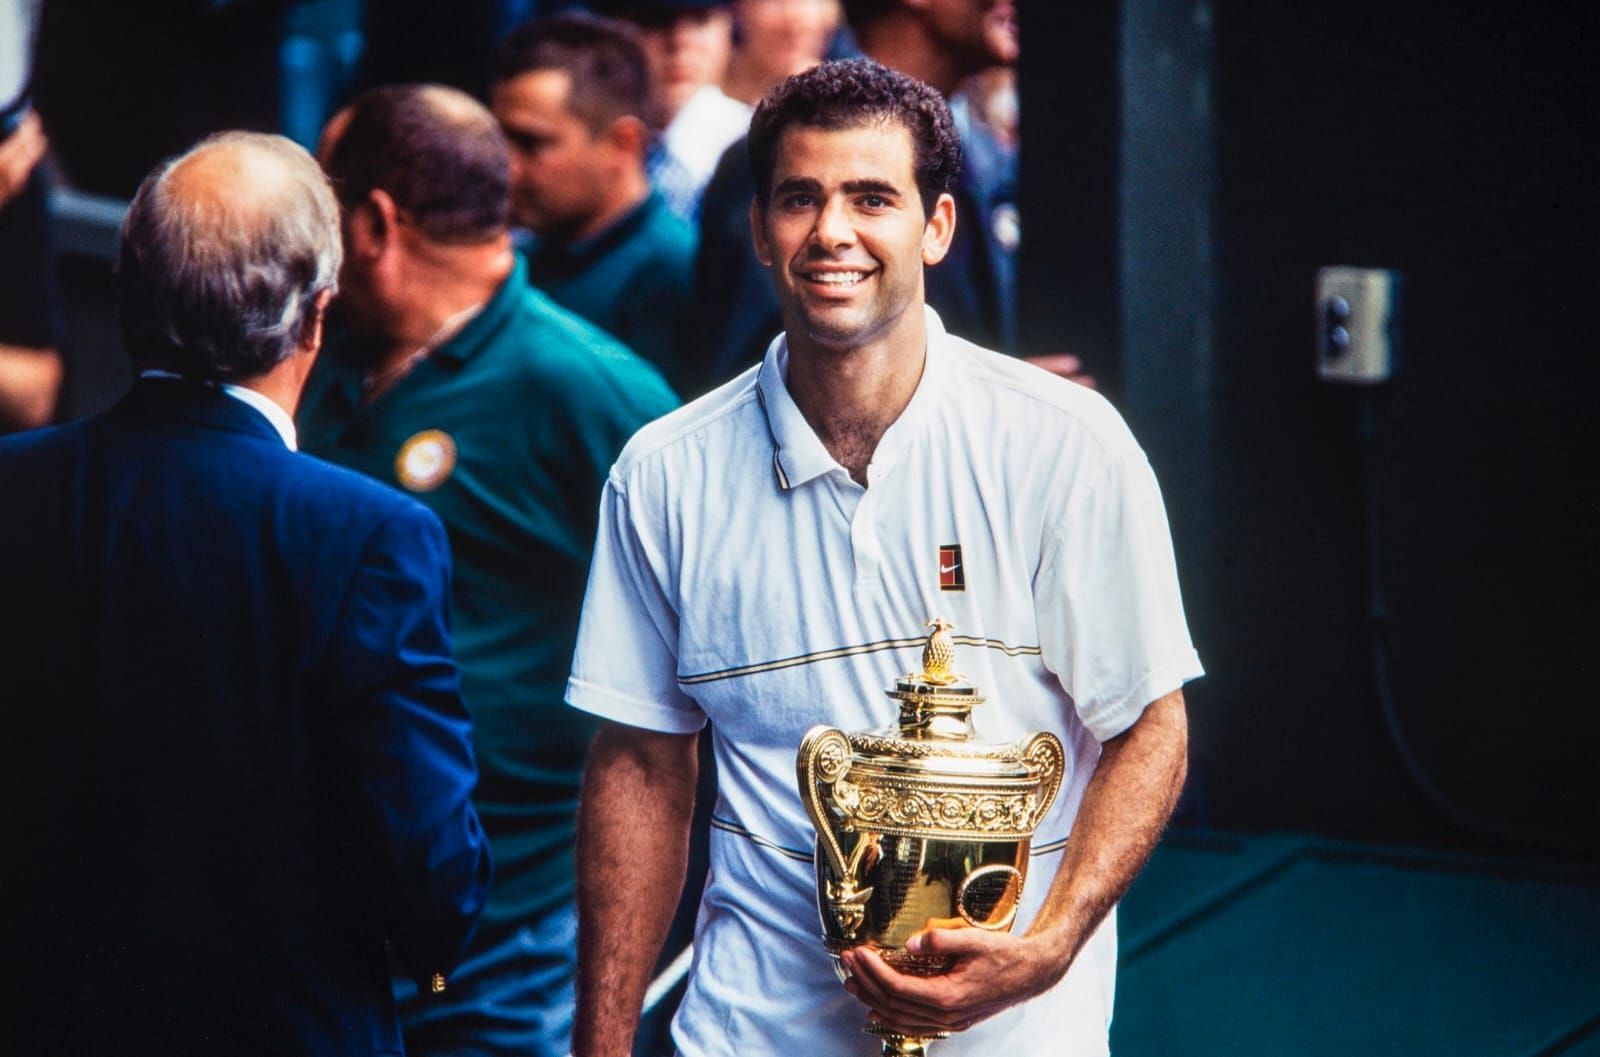 Pete Sampras pictured with one of his Wimbledon trophies (Picture Credit: X handle of @Wimbledon)